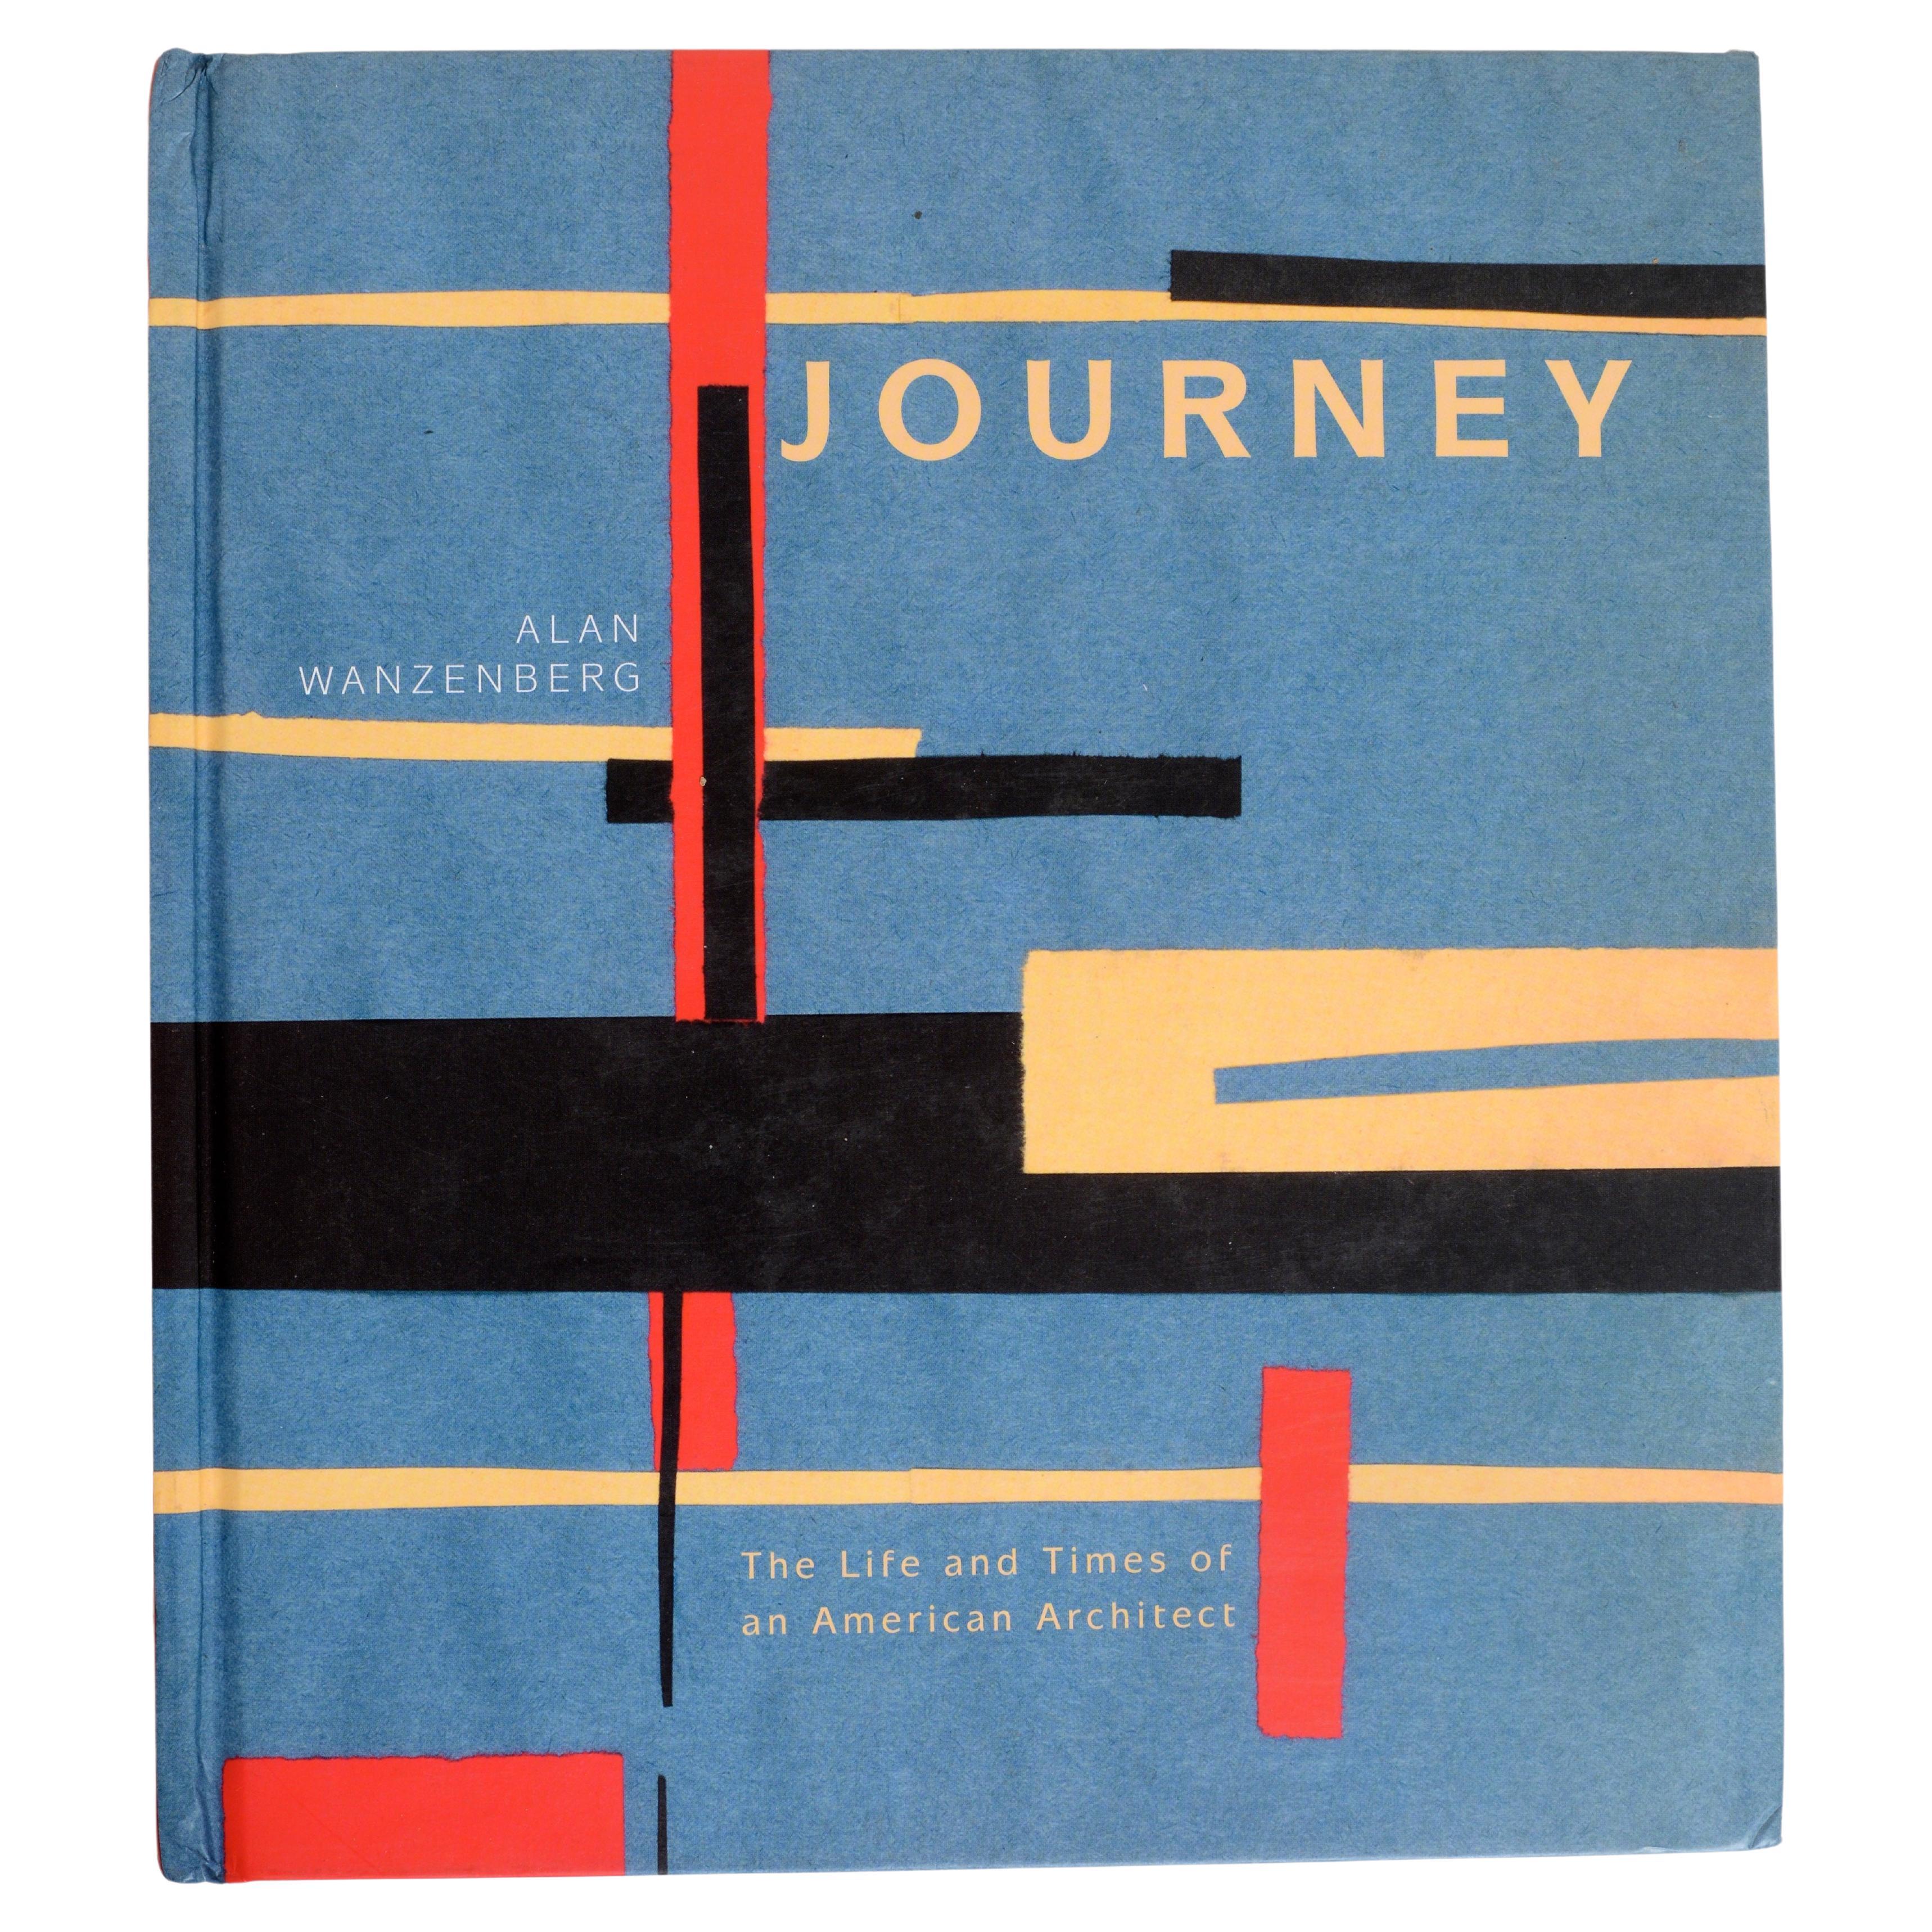 Journey: The Life & Times of an American Architect von Alan Wanzenberg, signiert